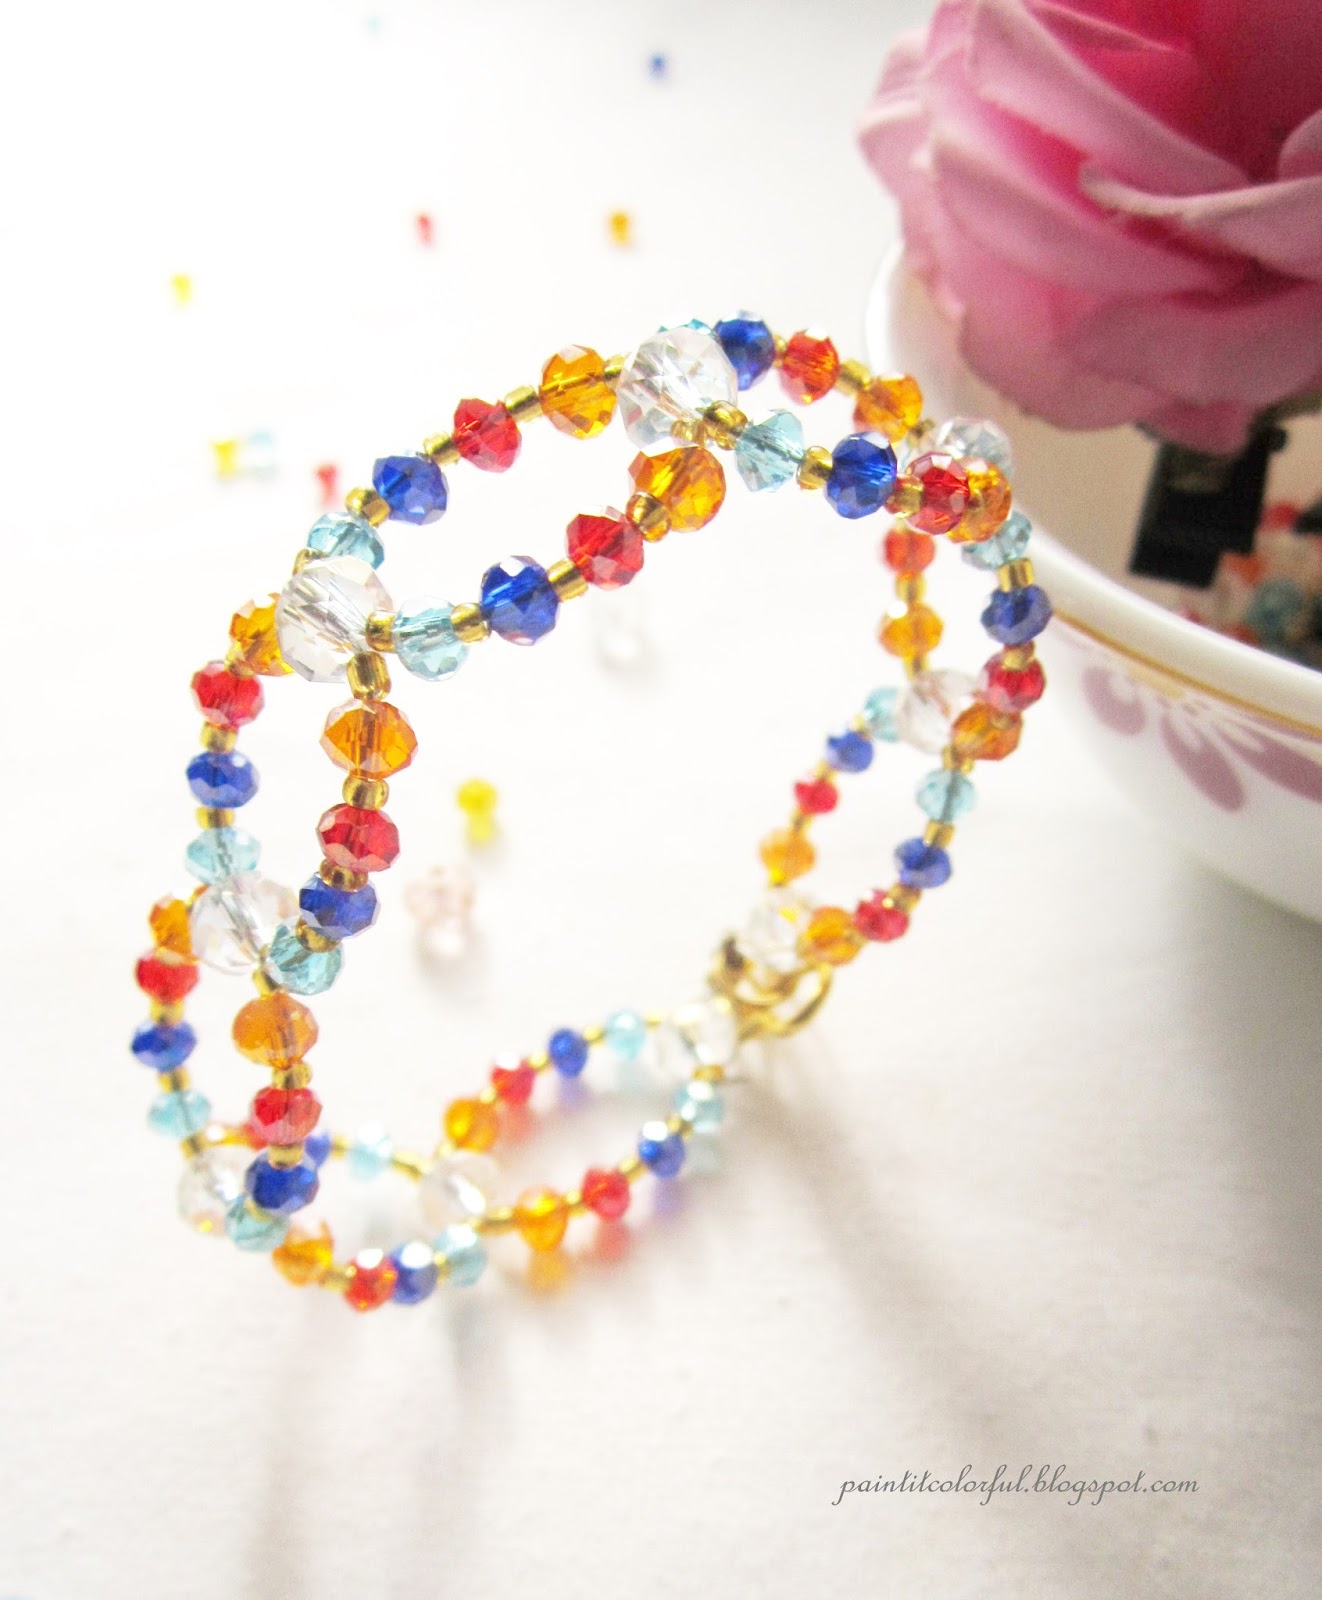 Beading Kits and Projects – The Bead Shop